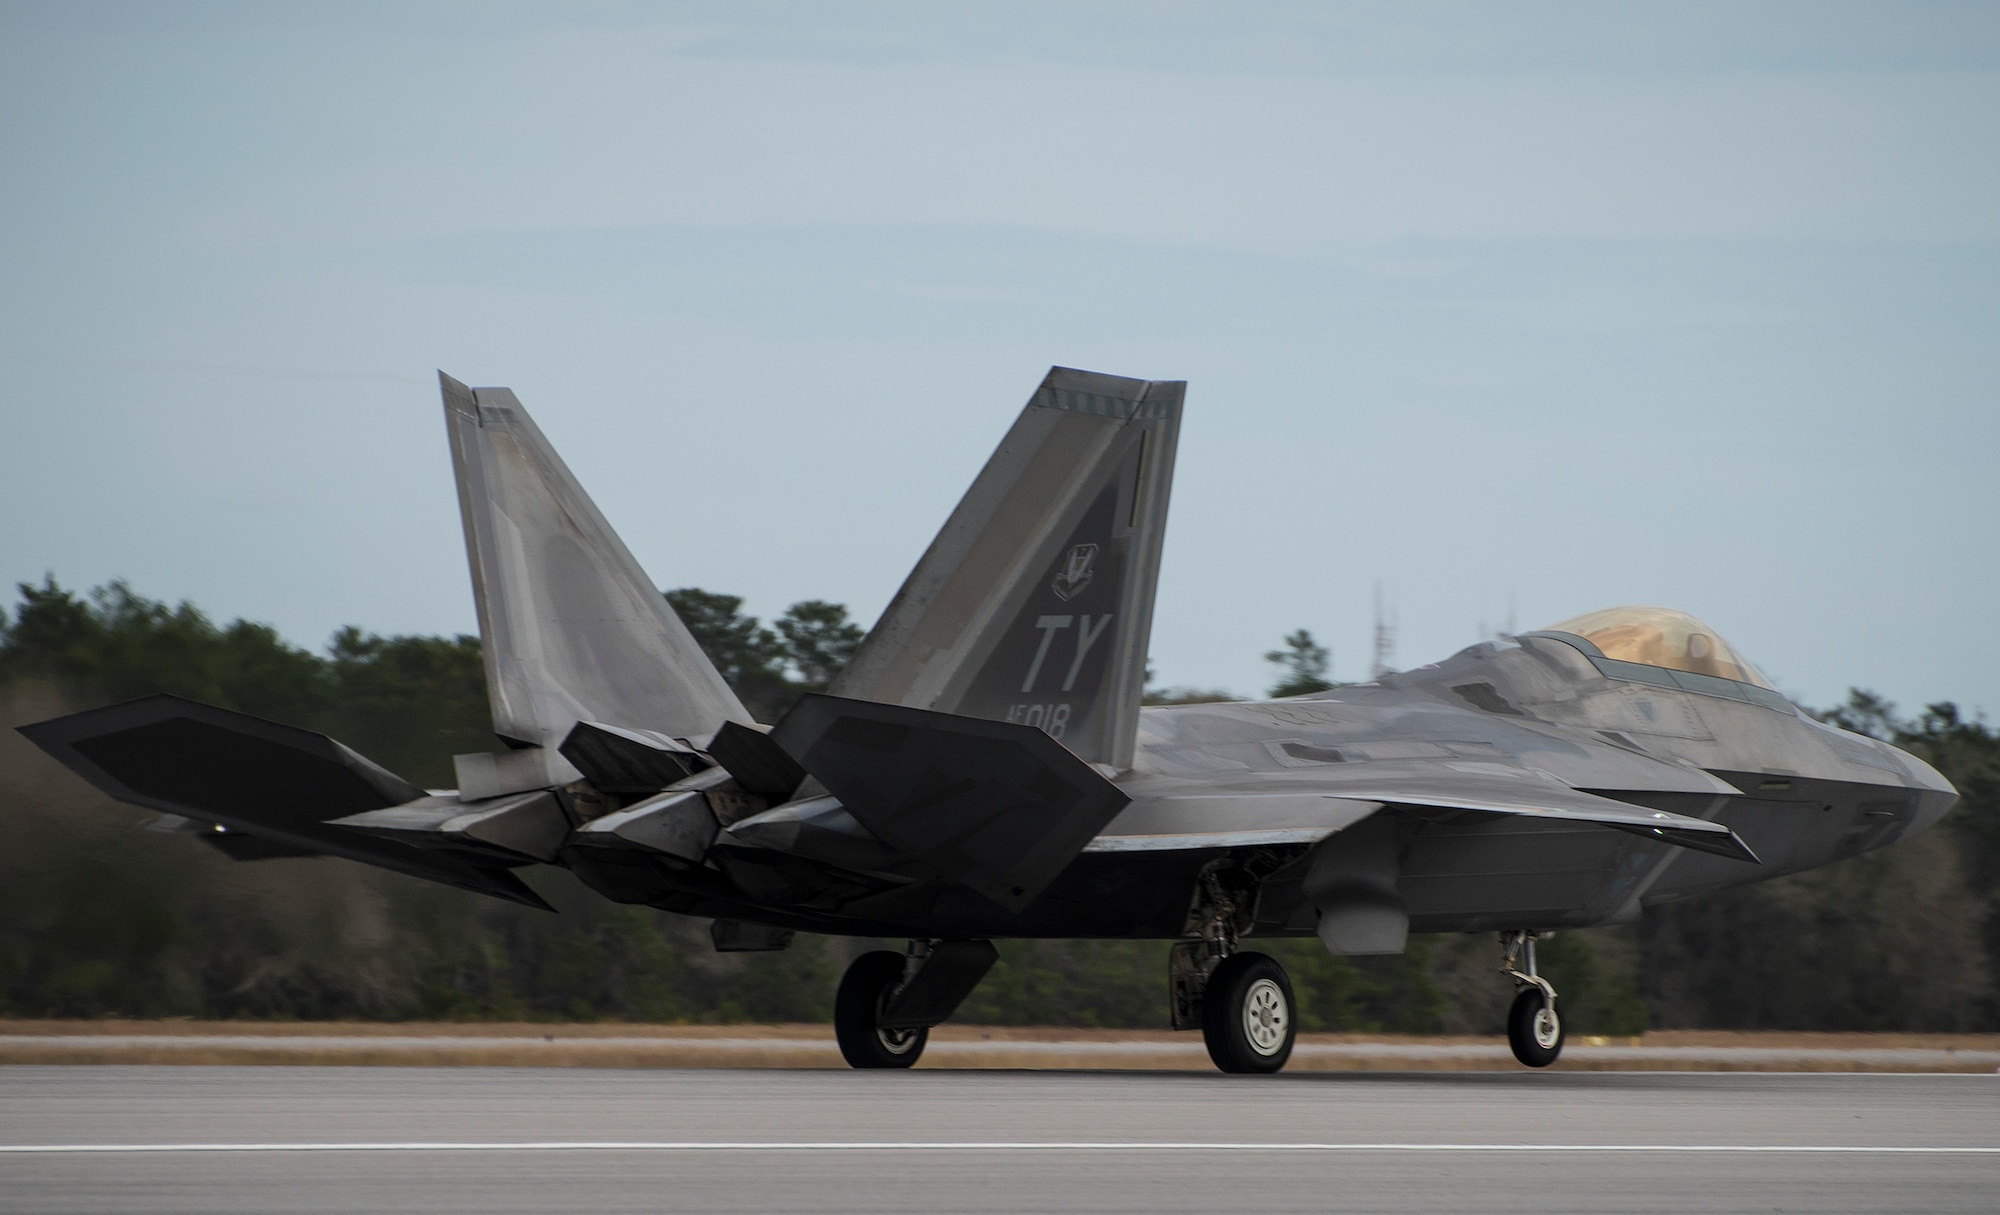 A 43rd Fighter Squadron Raptor flight Nov. 30 at Eglin Air Force Base, Fla. The 43rd FS’s mission is to provide pilot training in the F-22 and is a subordinate unit of Tyndall Air Force Base’s 325th Fighter Wing.